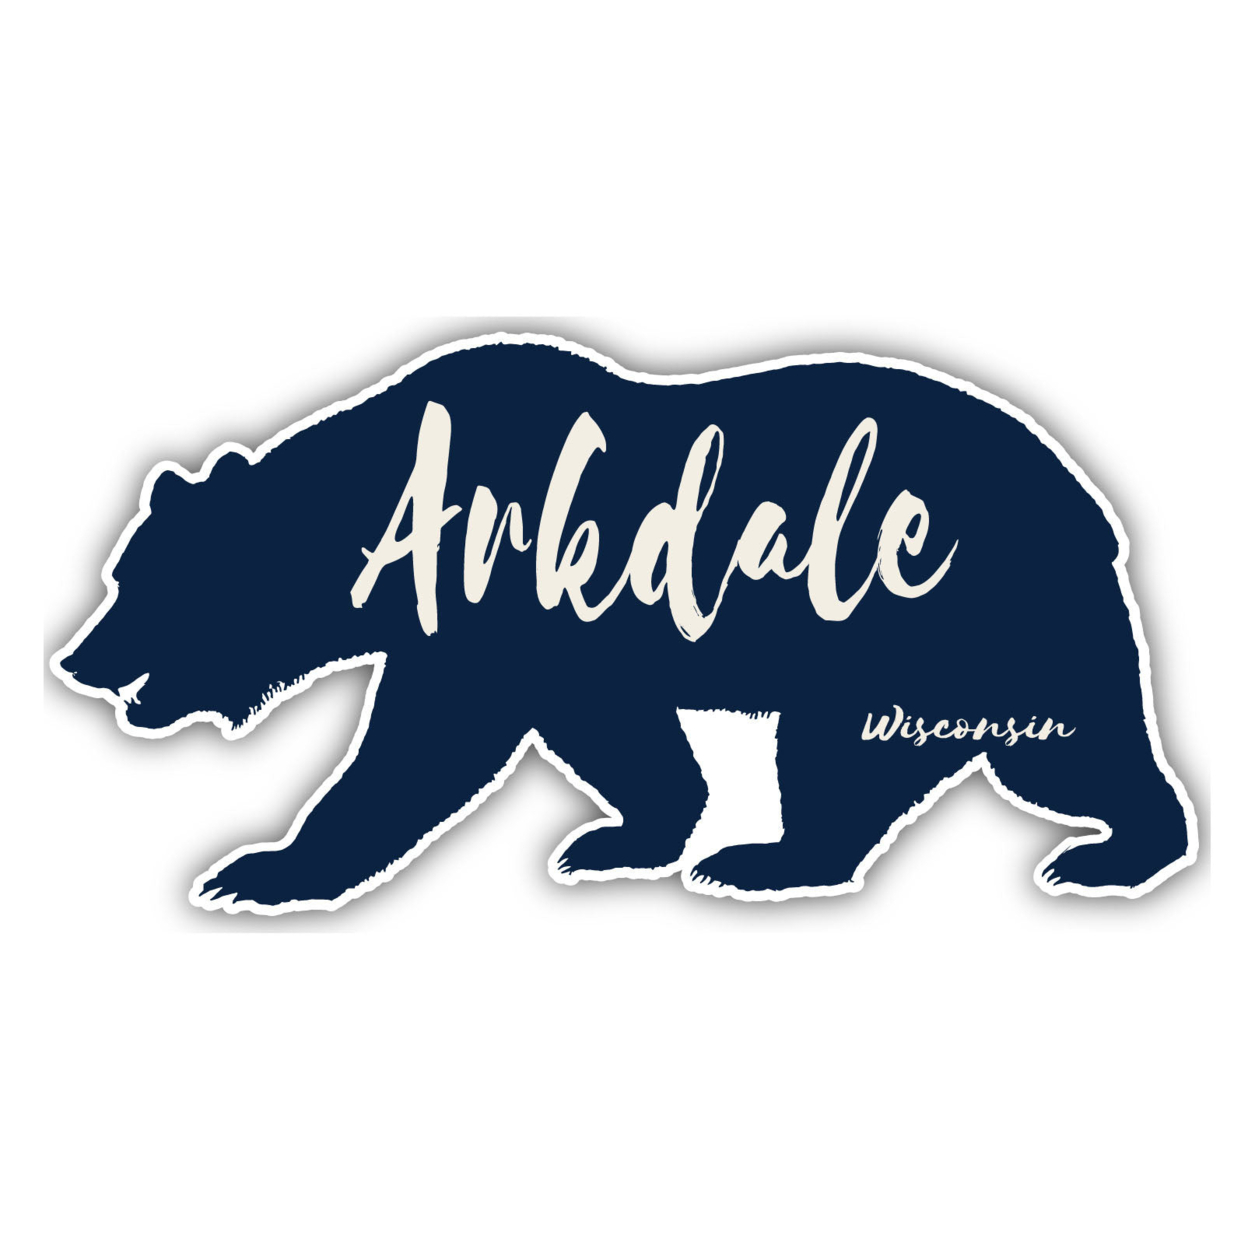 Arkdale Wisconsin Souvenir Decorative Stickers (Choose Theme And Size) - Single Unit, 12-Inch, Adventures Awaits